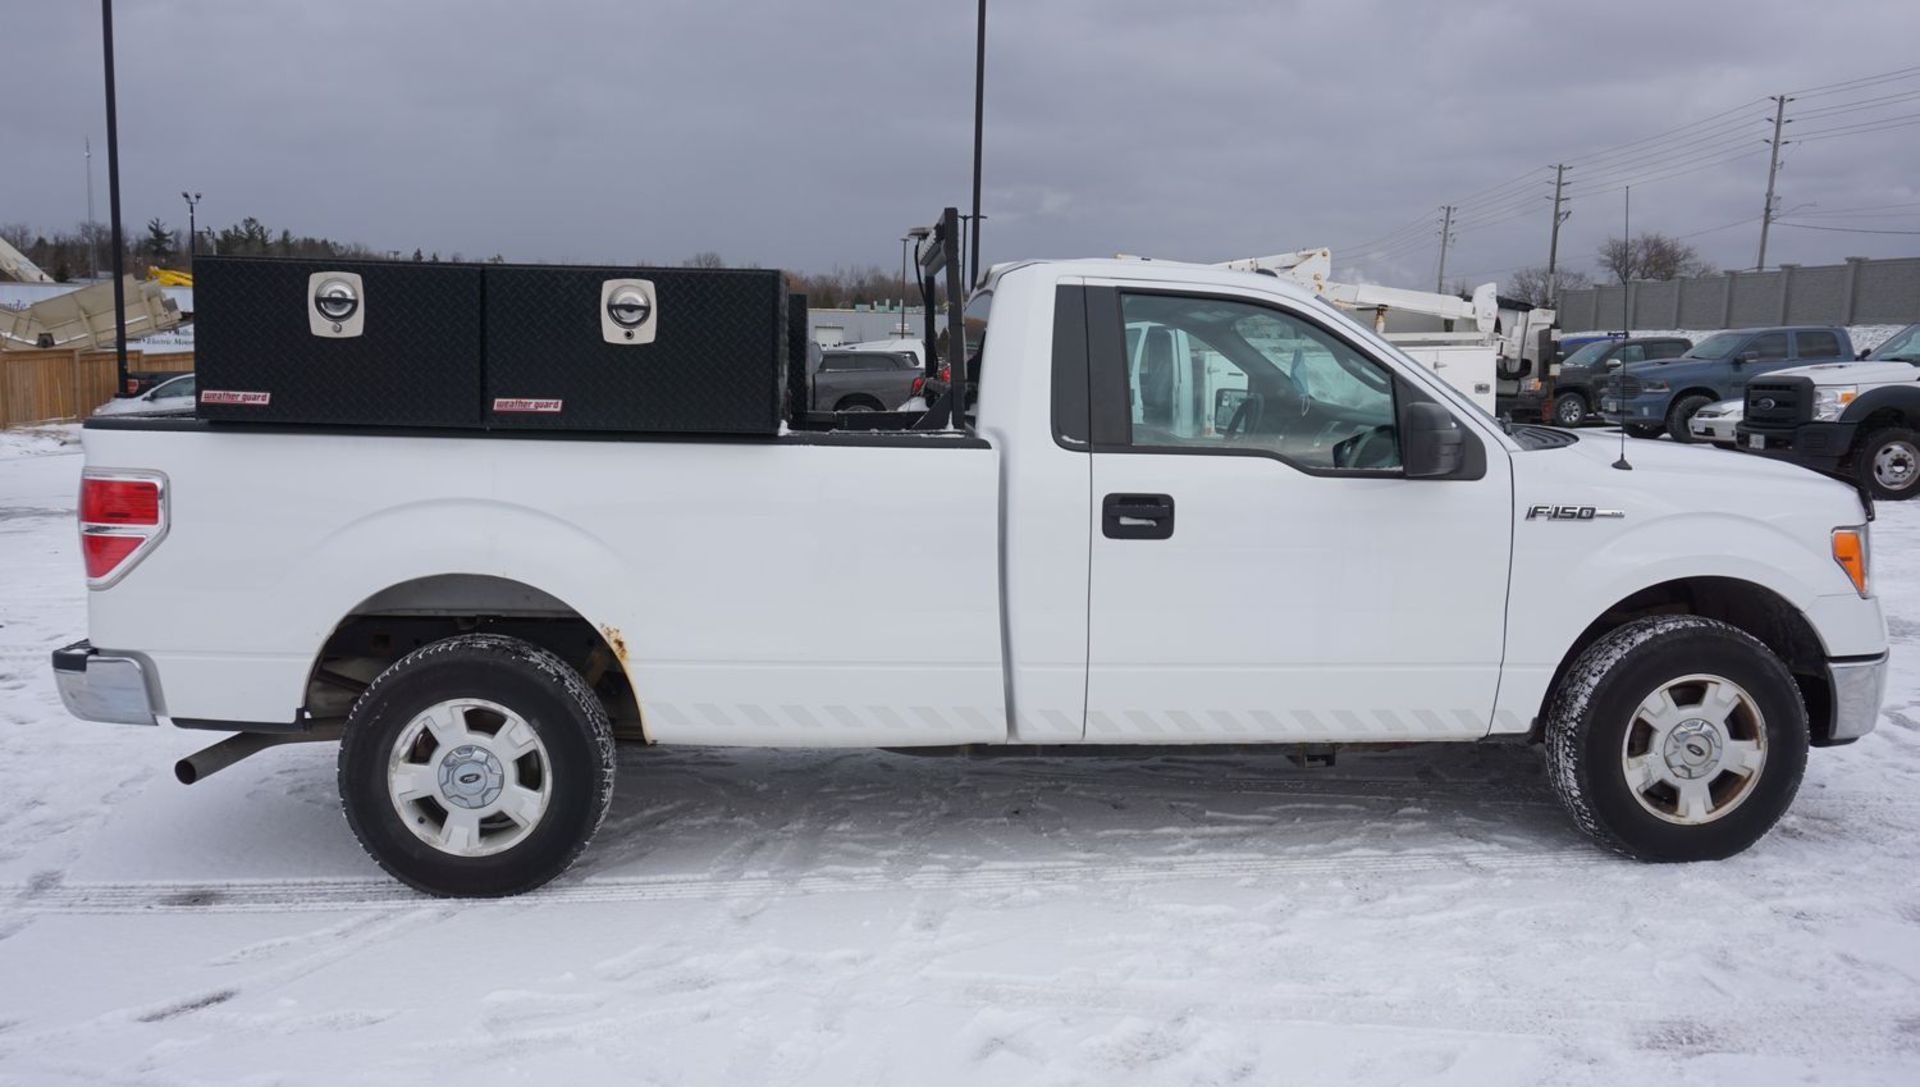 2014 FORD F150XL REG CAB 4X2 PICKUP W/ 5.0L V8 GAS ENGINE C/W (2) WEATHER GUARD HI-SIDE TOOL BOXES, - Image 4 of 8